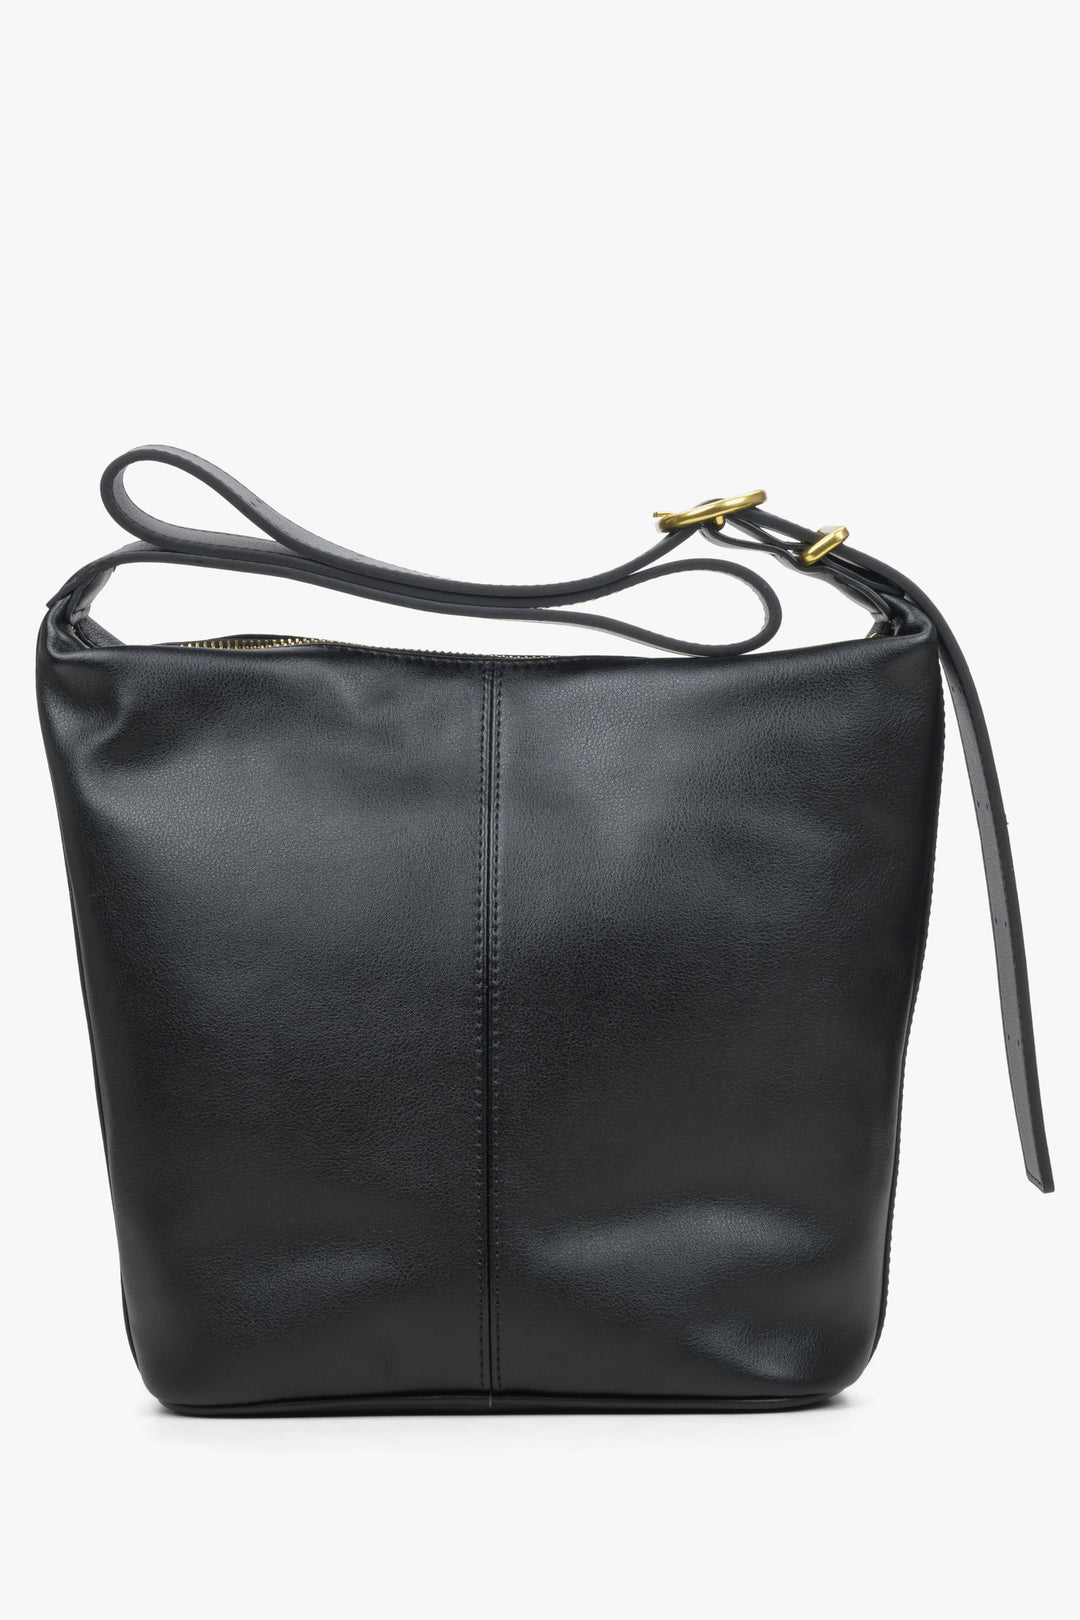 Black bucket-style bag made of genuine leather by Estro.